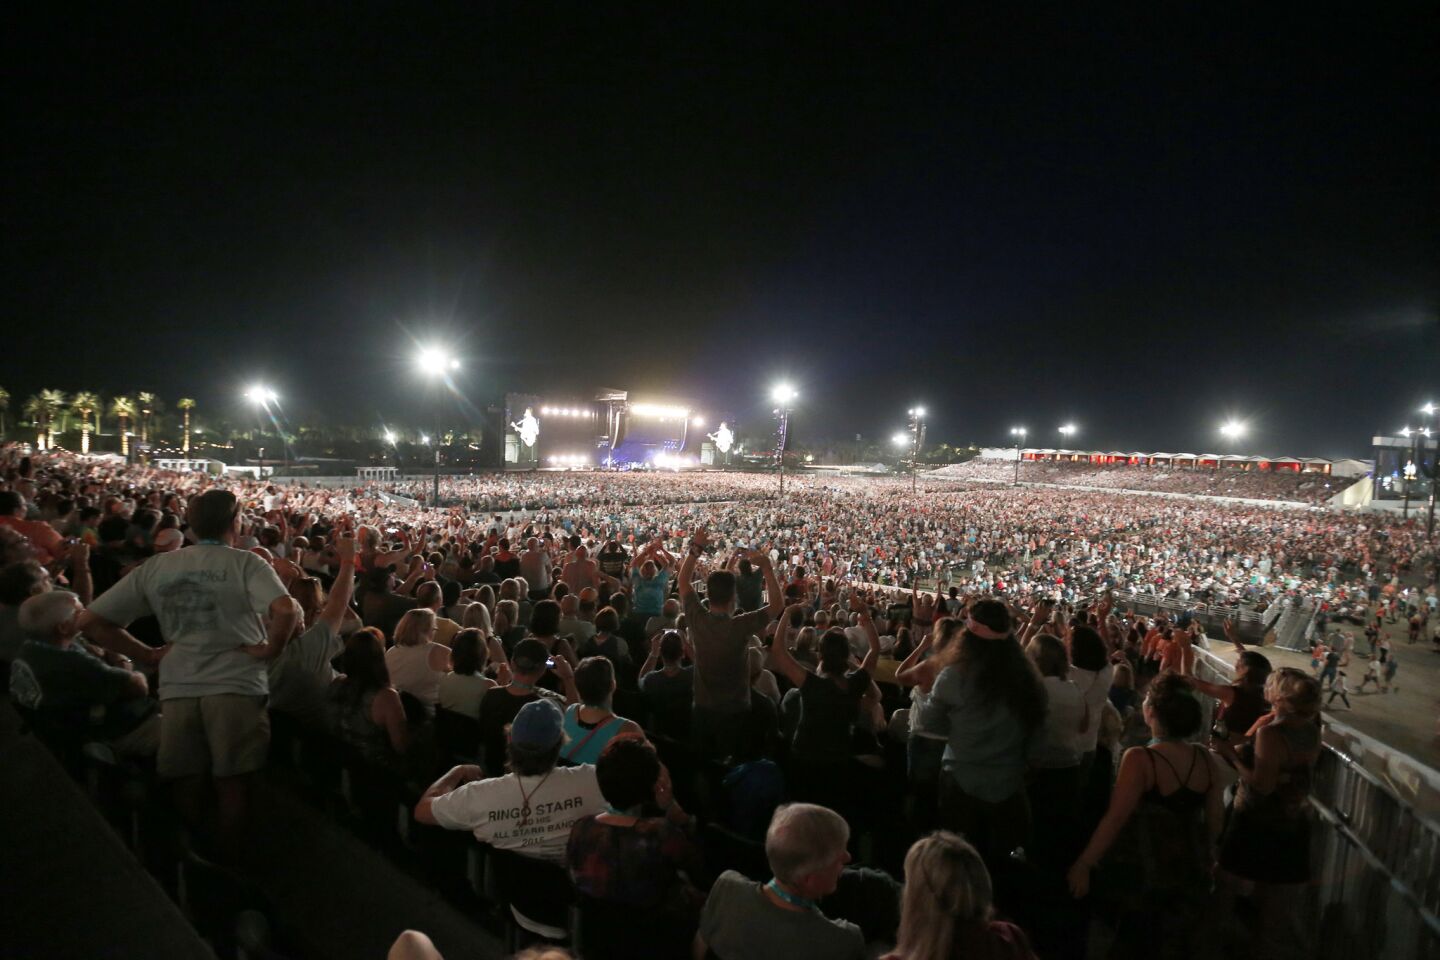 A view from the grandstand seats as fans cheer and sing along to Paul McCartney's performance on the second day of the three-day Desert Trip at the Empire Polo Club grounds in Indio.